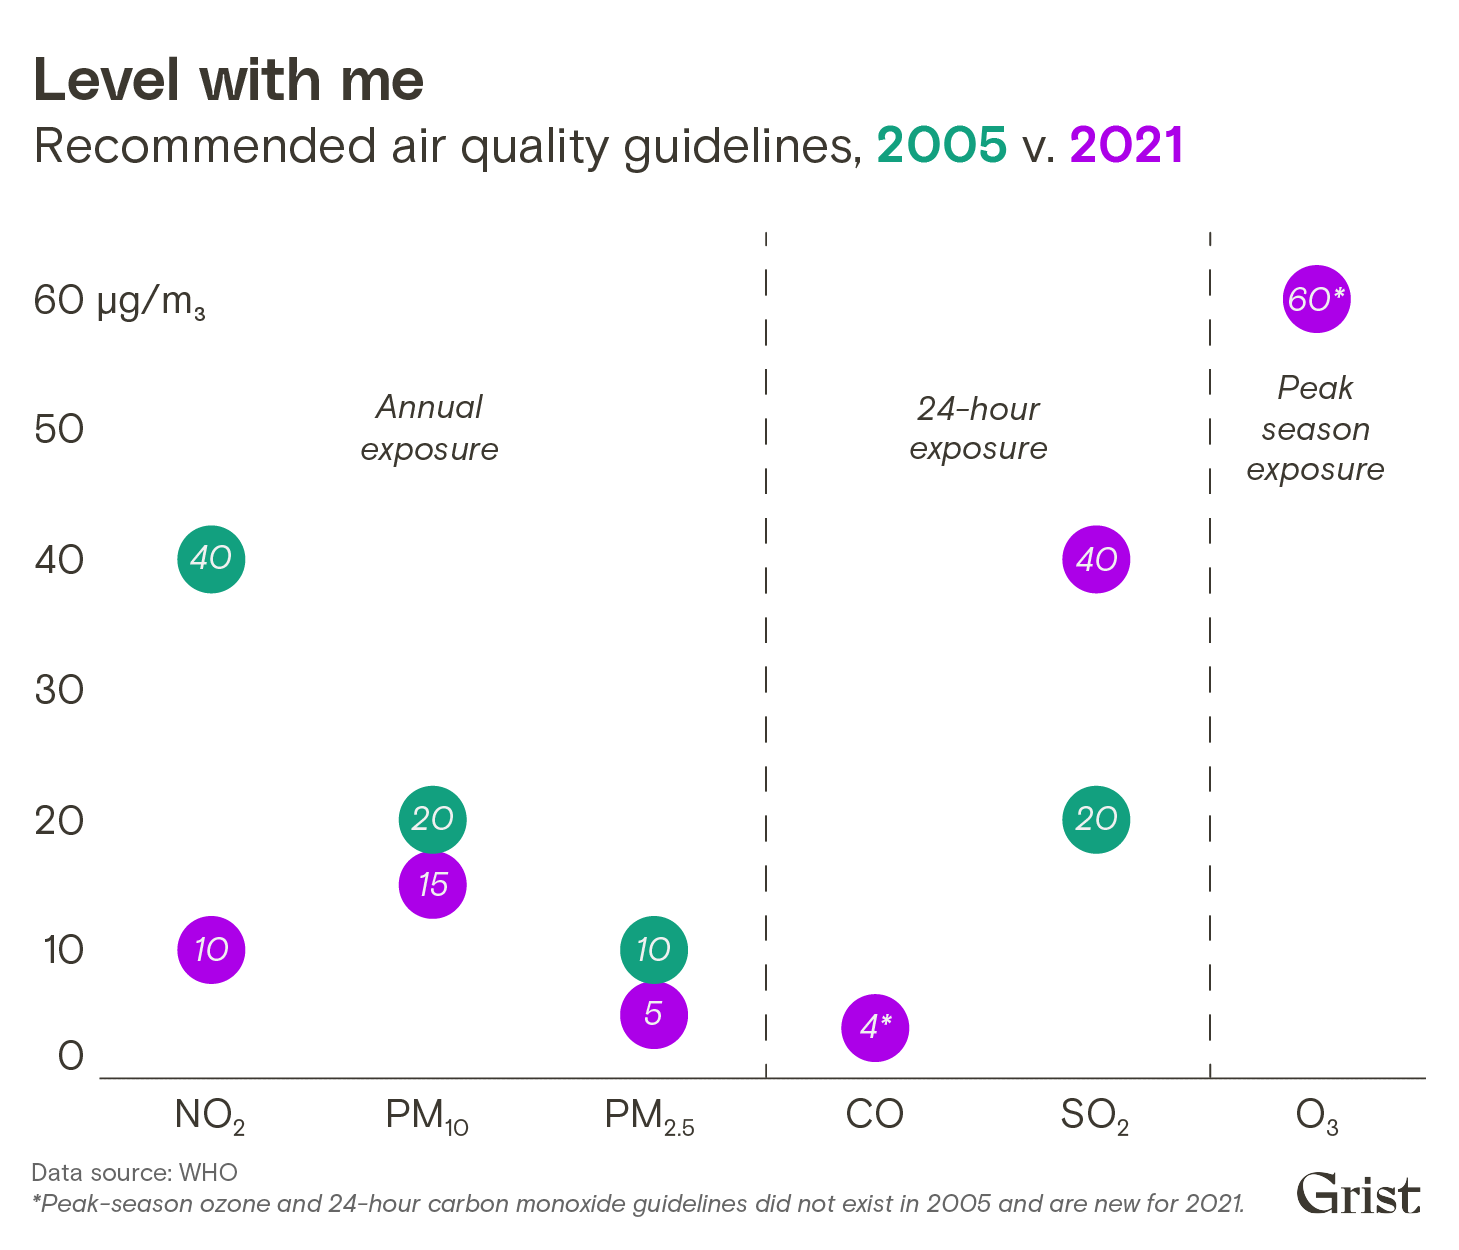 A dot chart showing recommended air quality guidelines from the WHO for 2005 v. 2021. Particulate matter and nitrogen oxide guidelines are stronger, sulfur dioxide guidelines are weaker, and the organization released new guidelines for carbon monoxide and peak-season ozone exposure.